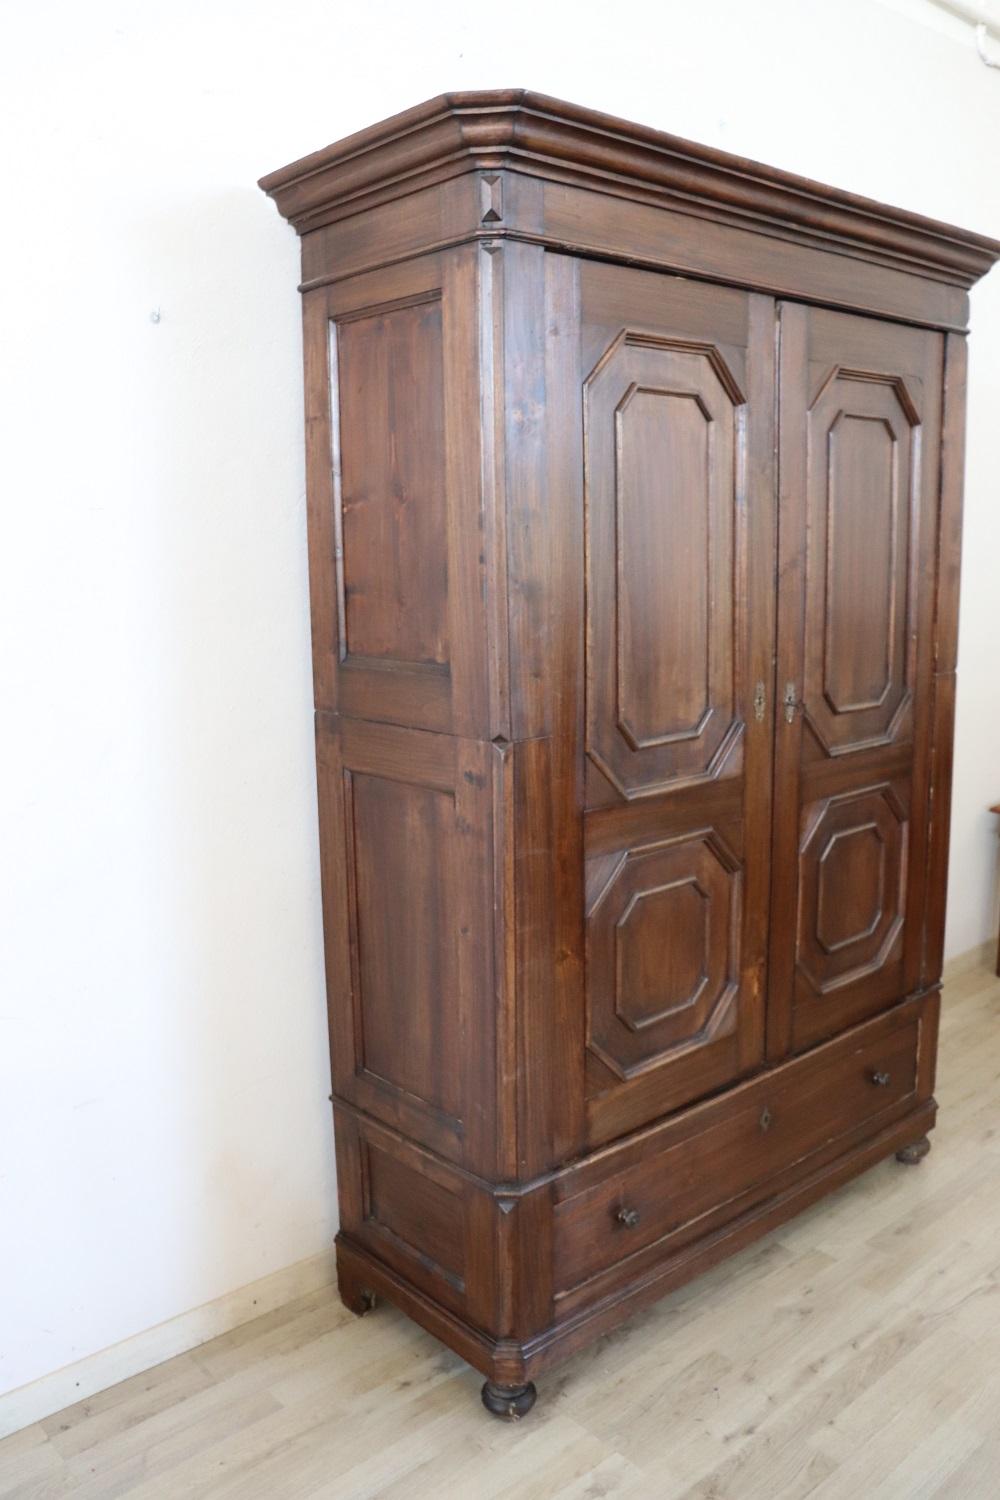 Antique wardrobe in solid poplar wood made in mid 19th century Italian of the period Louis Philippe. Very simple and linear enriched by geometric decorations on the doors . The interior is divided to have both shelves and a clothes rail. In the